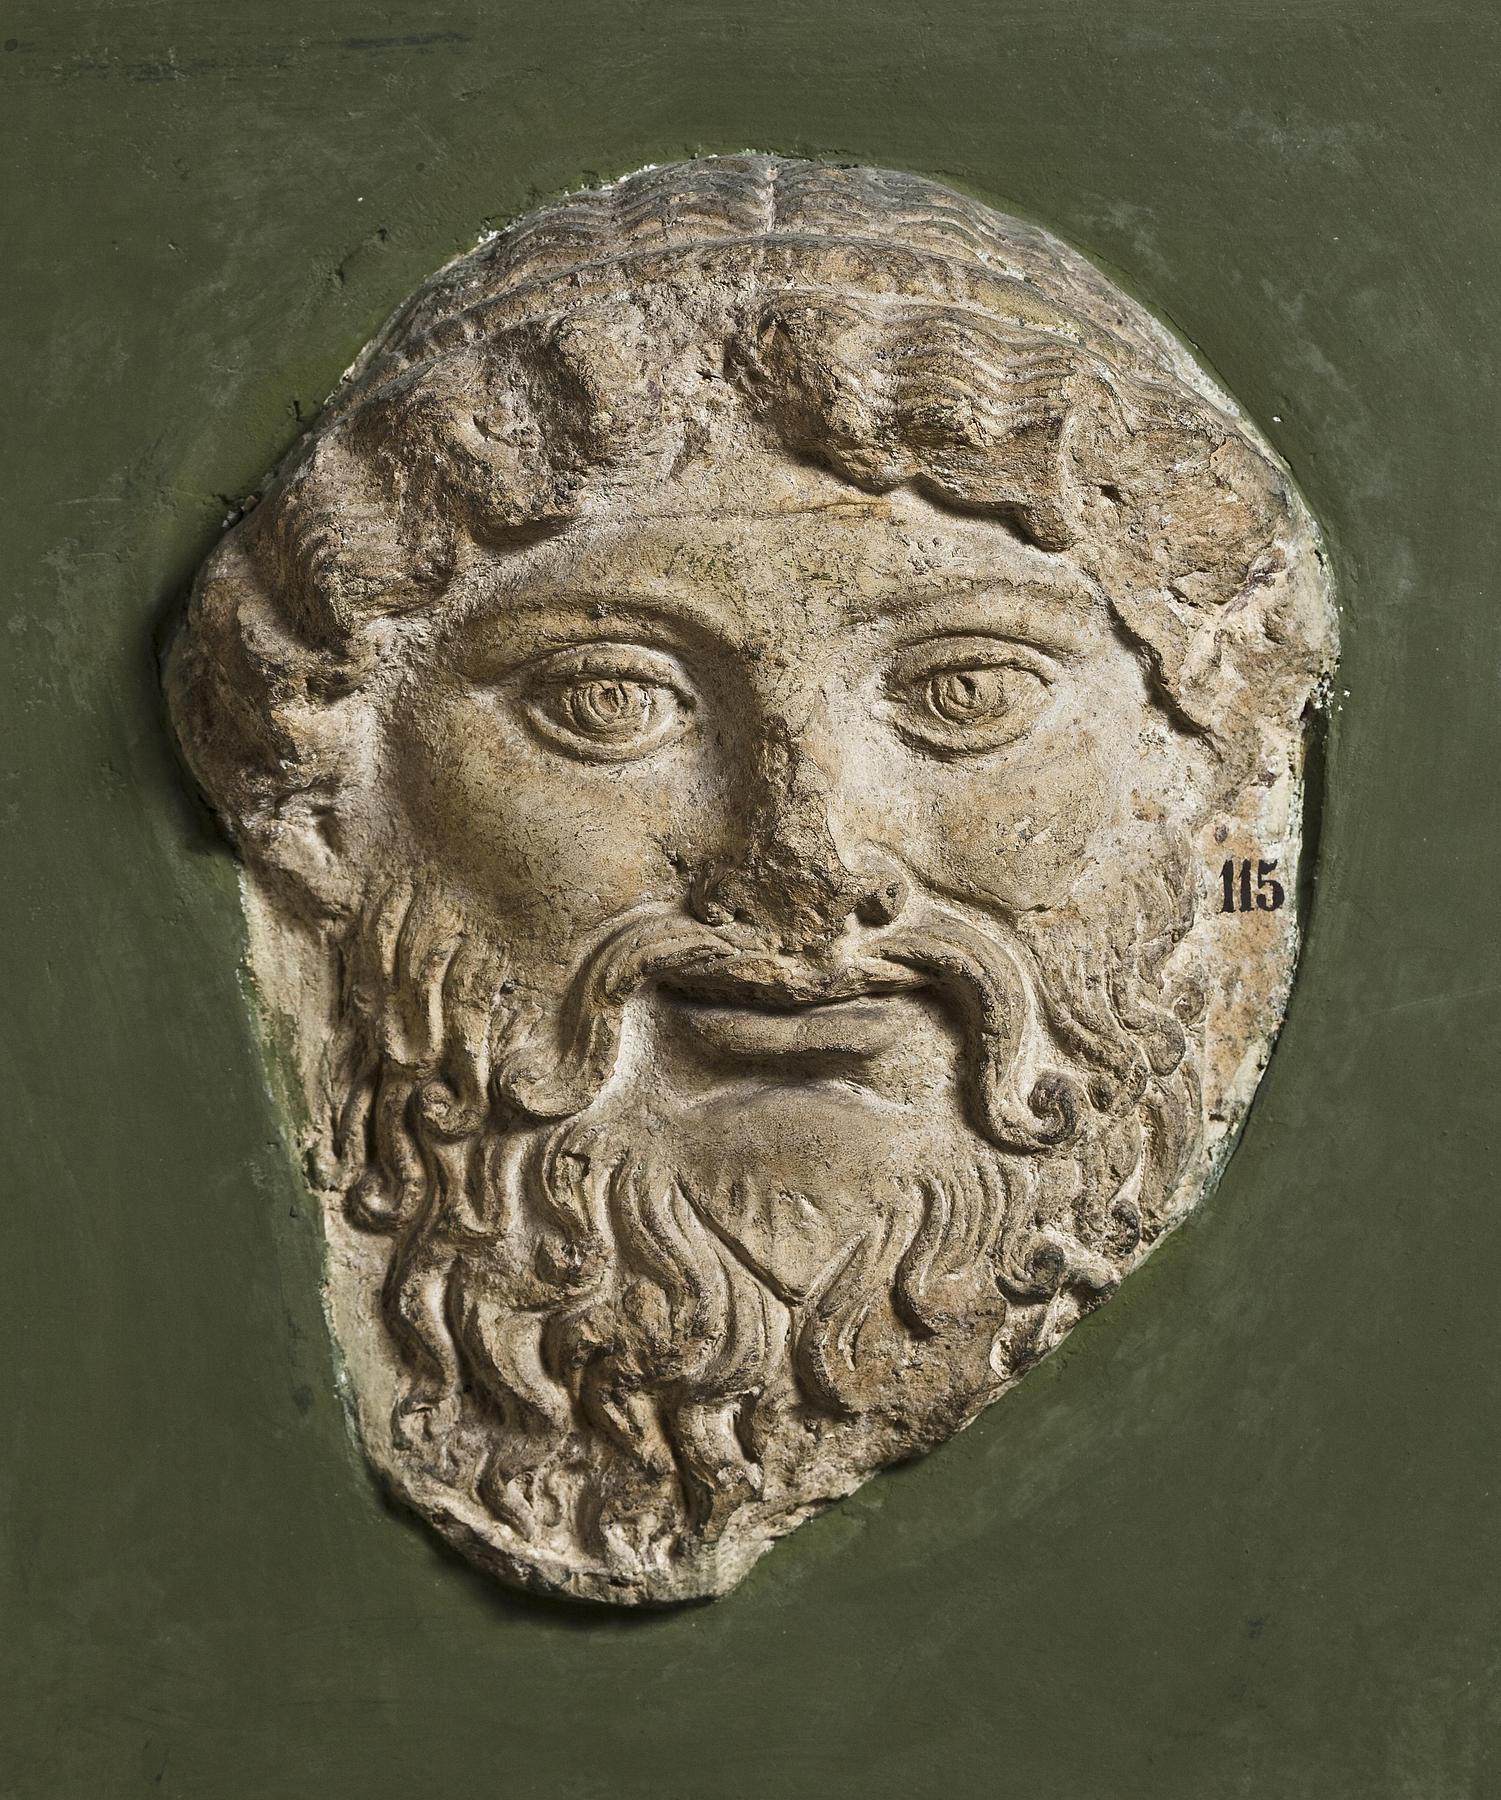 Campana relief with bearded male mask, H1115